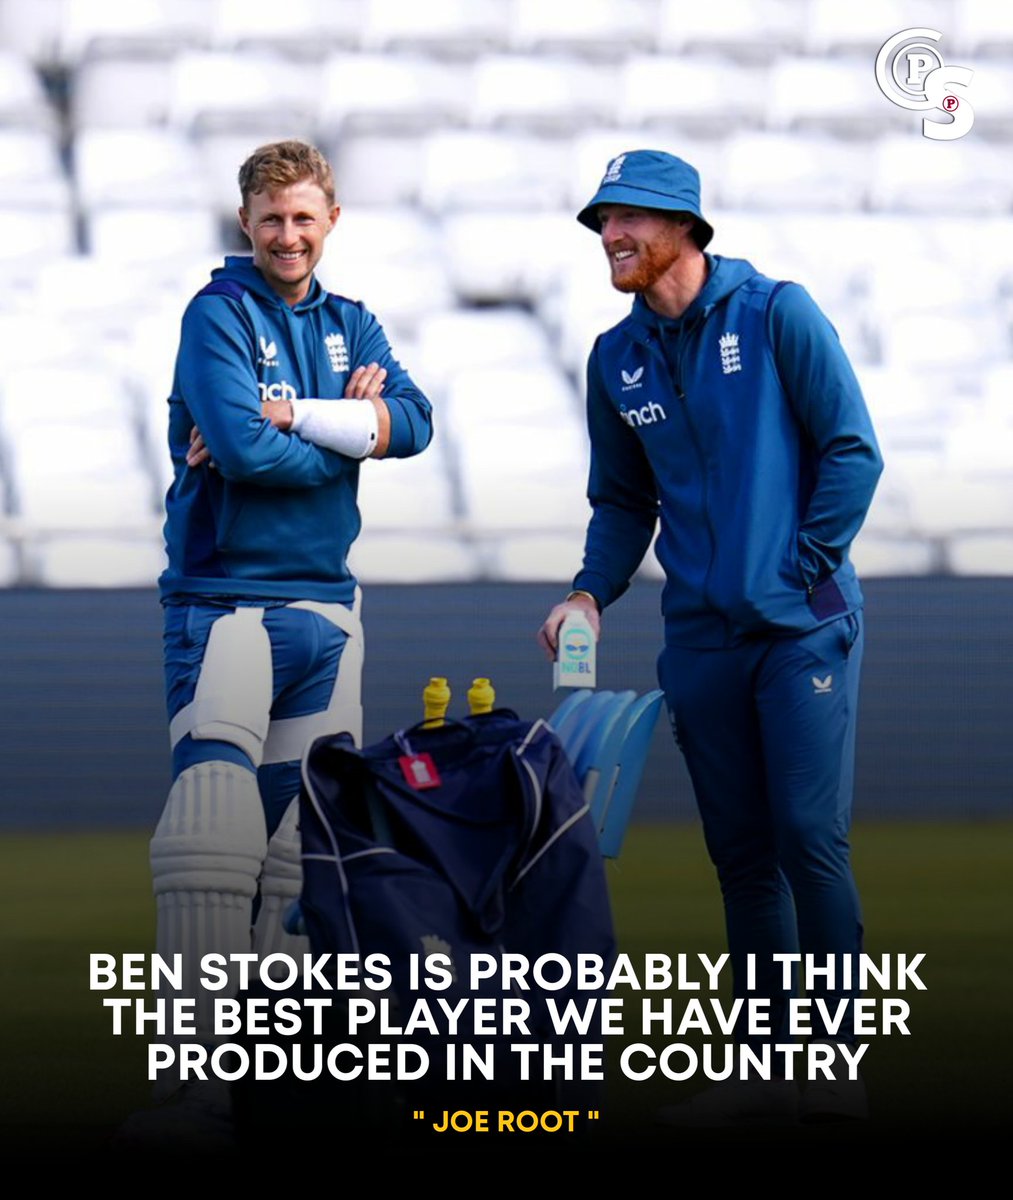 Ben Stokes - Truly a living legend 👑
.

#CricketTwitter    #RohitSharma𓃵 #ViratKohli #ViratKohli𓃵 #RohitSharma #WIvsIND #WIvIND #WorldCup2023 #CWC2023  #AsiaCup2023 #Asiangames #CricketWorldCup #WC2023 #INDvPAK #INDvsWI